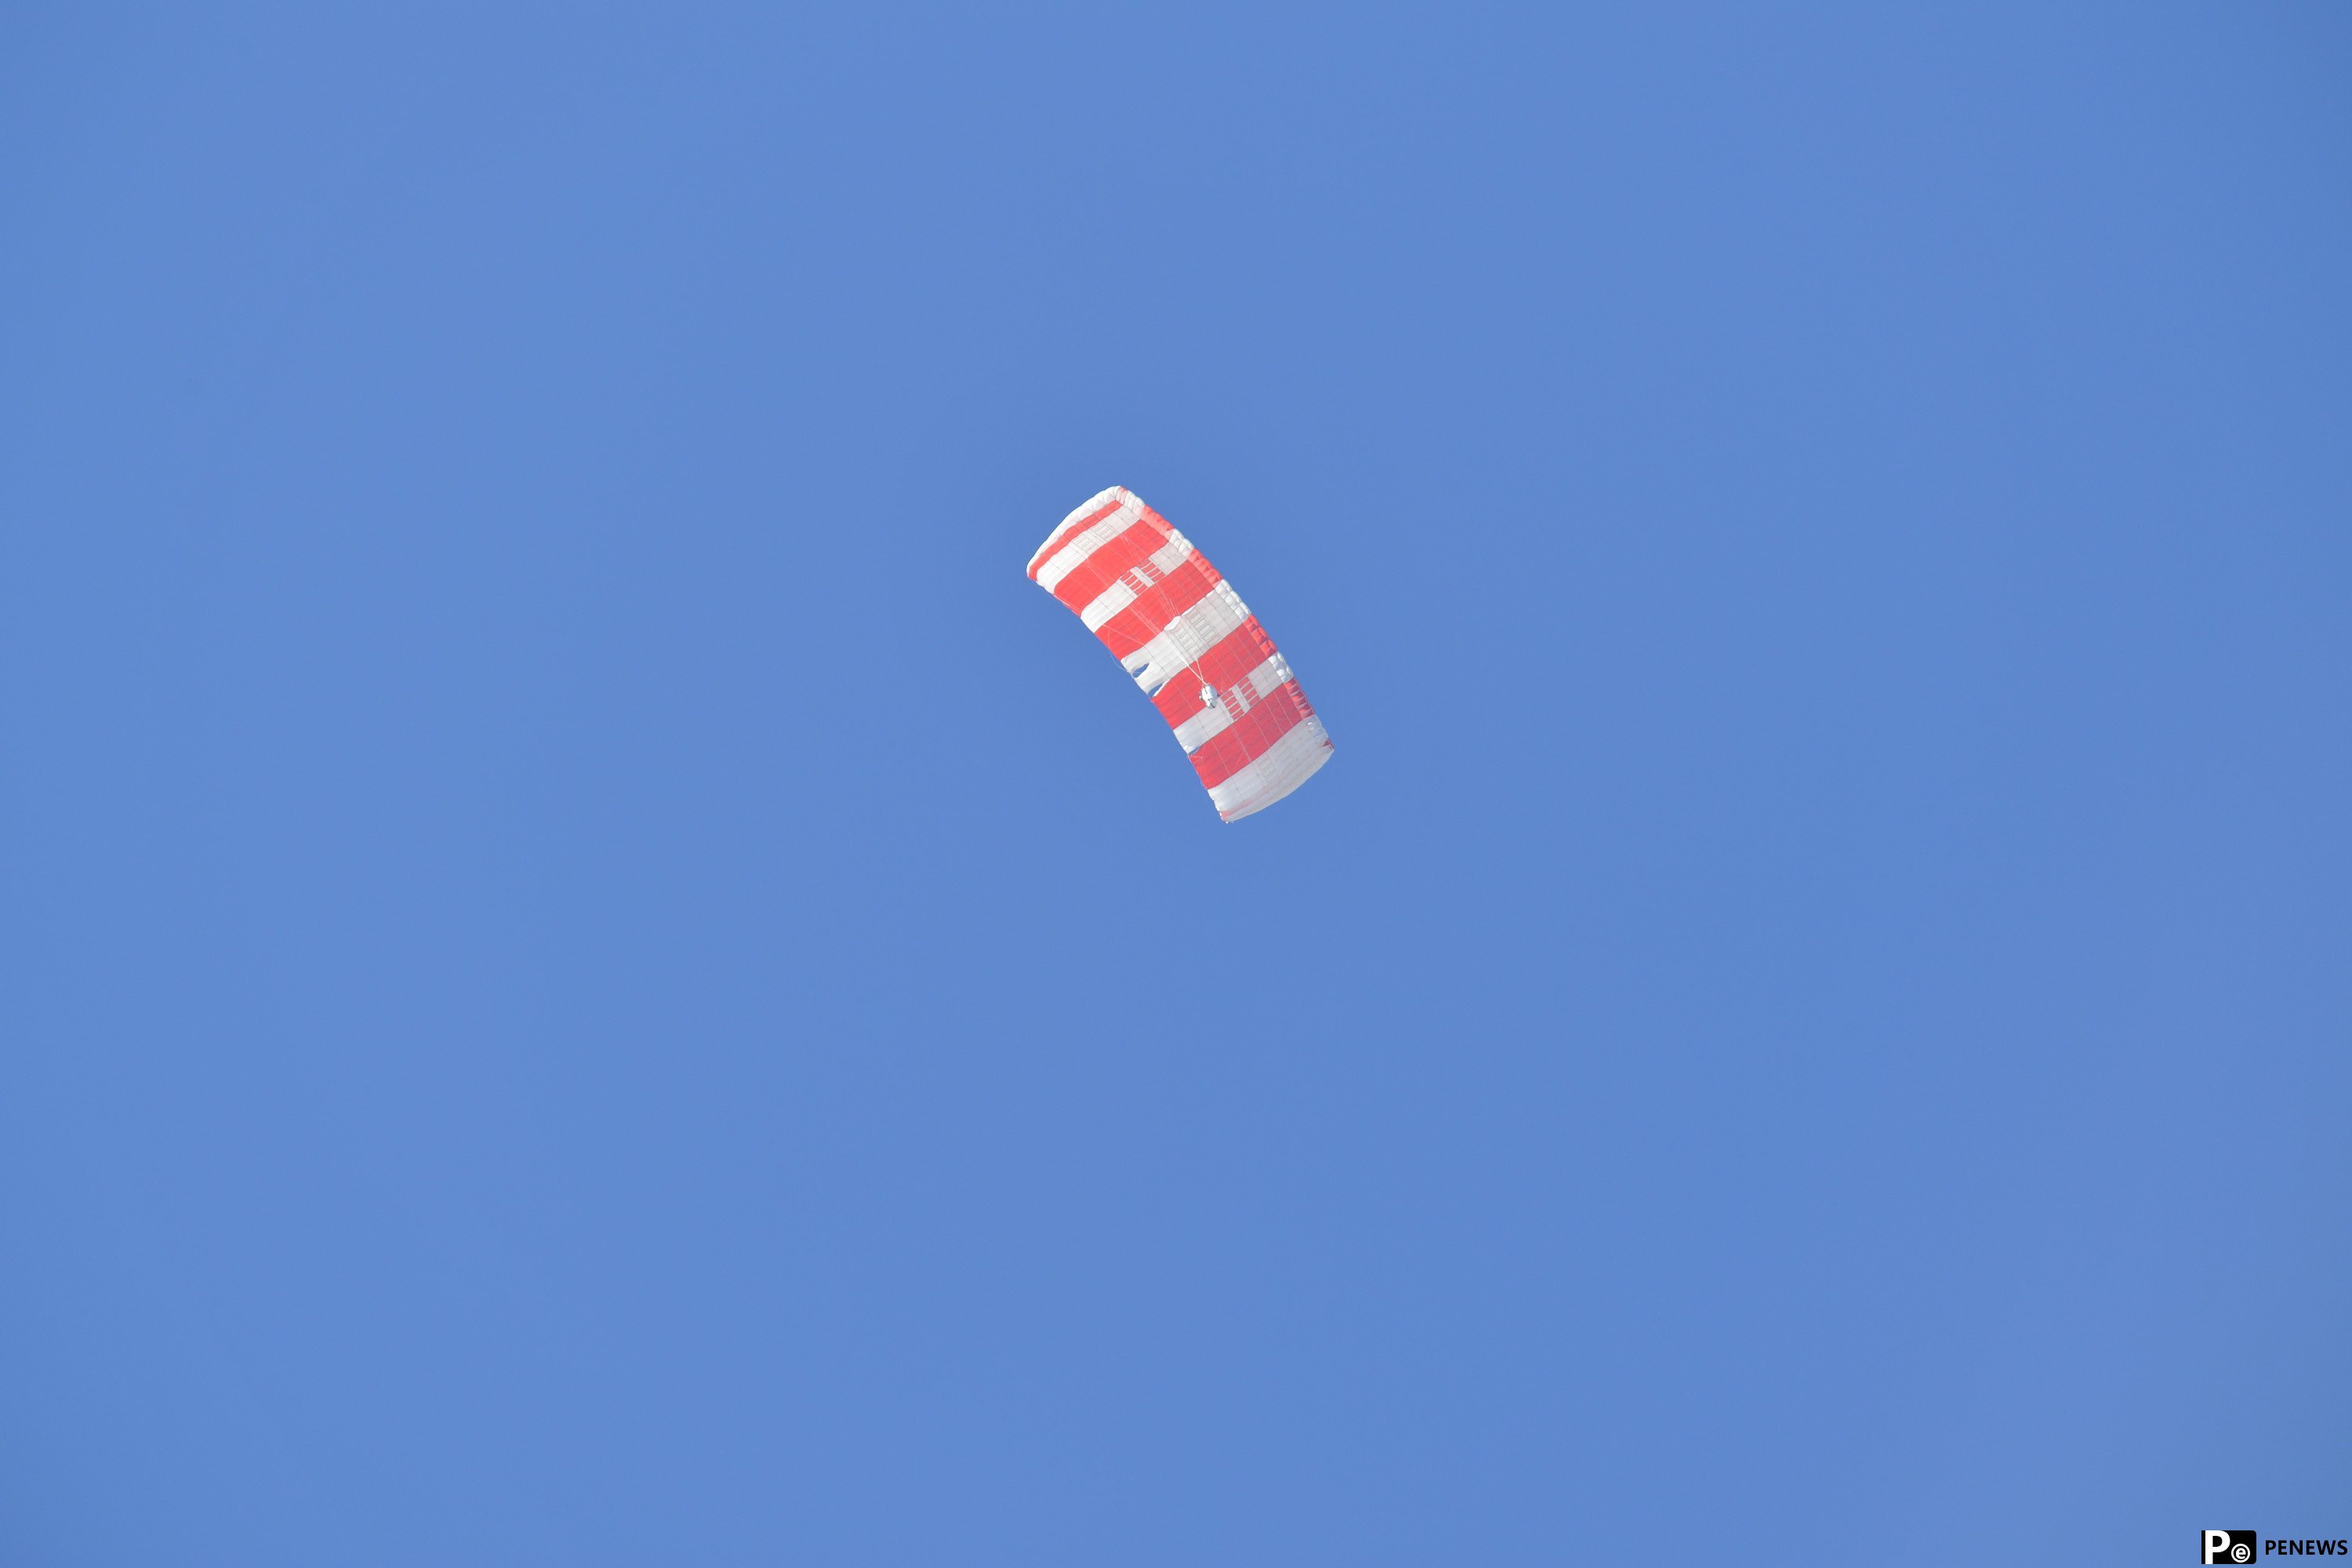 China tests new parachute system for rocket boosters